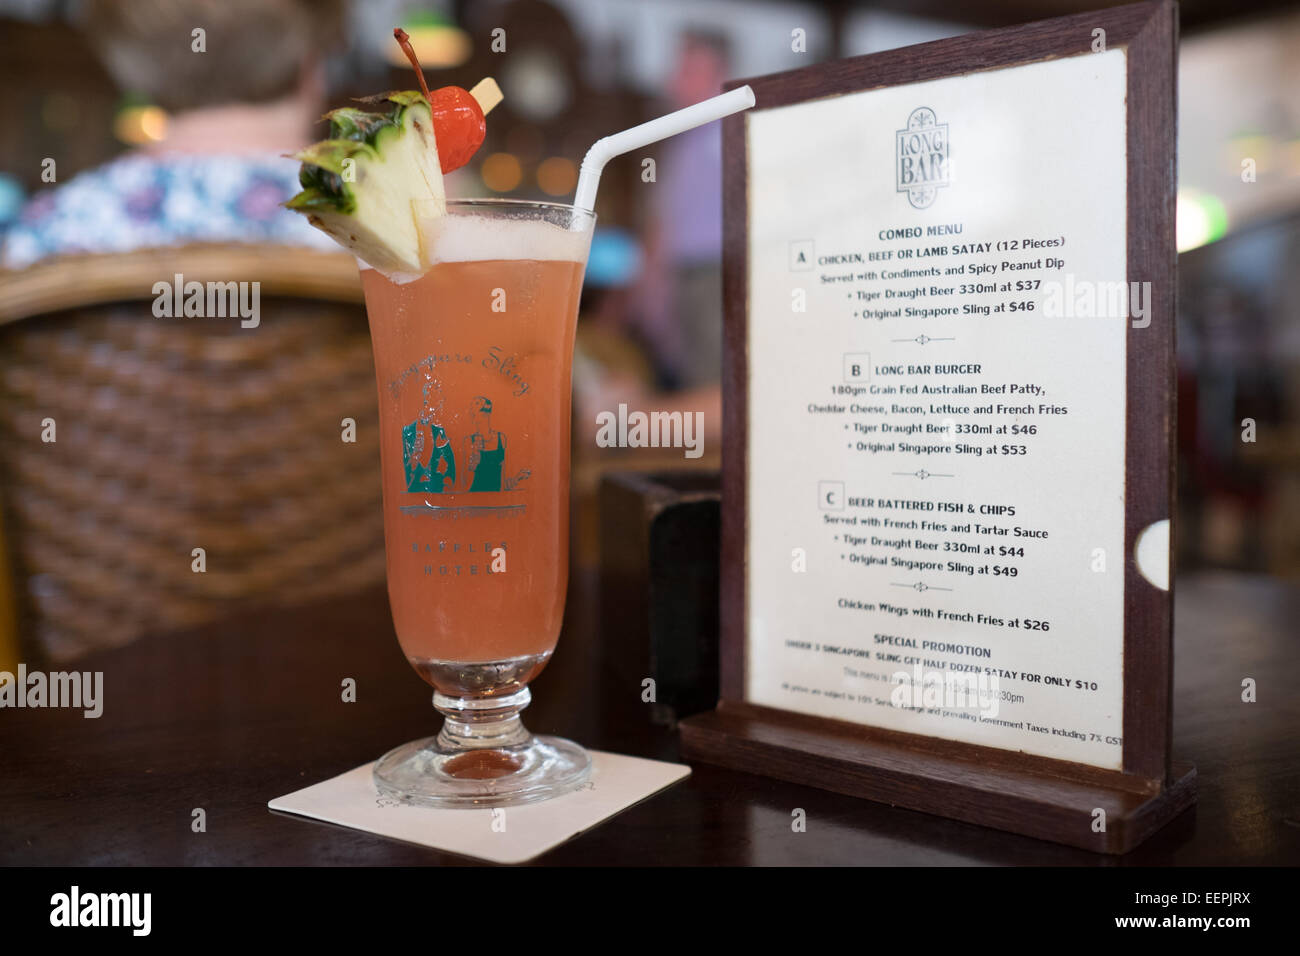 Inside the Long Bar of the Raffles Hotel in Singapore. Home of the Singapore Sling. Stock Photo